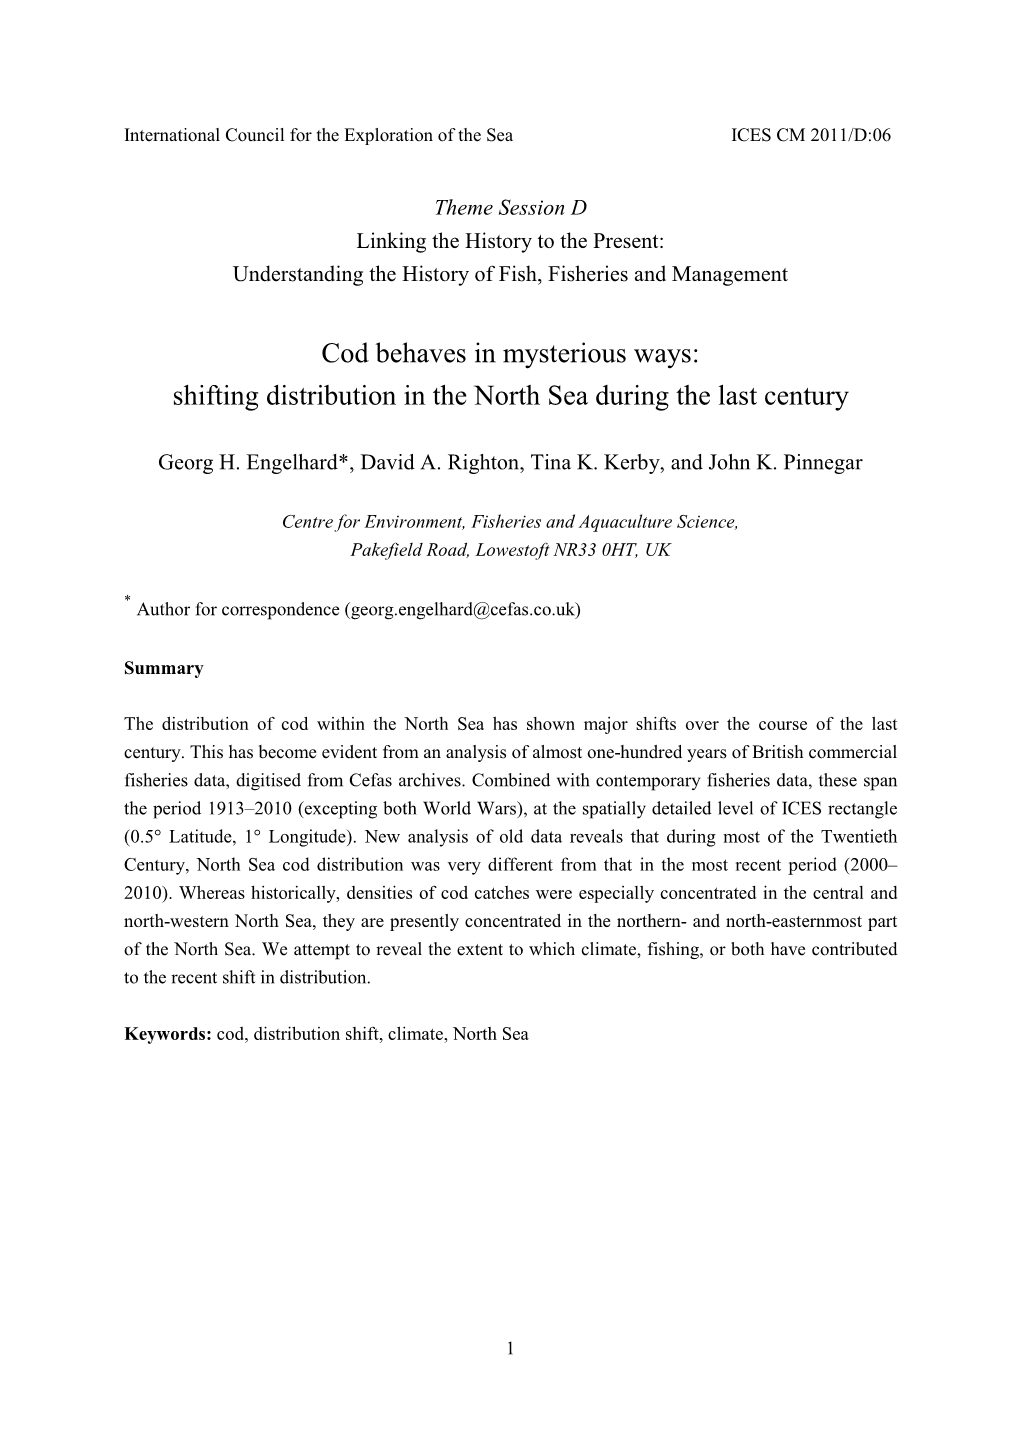 Cod Behaves in Mysterious Ways:Shifting Distribution in the North Sea During the Last Century. ICES CM 2011/D:06